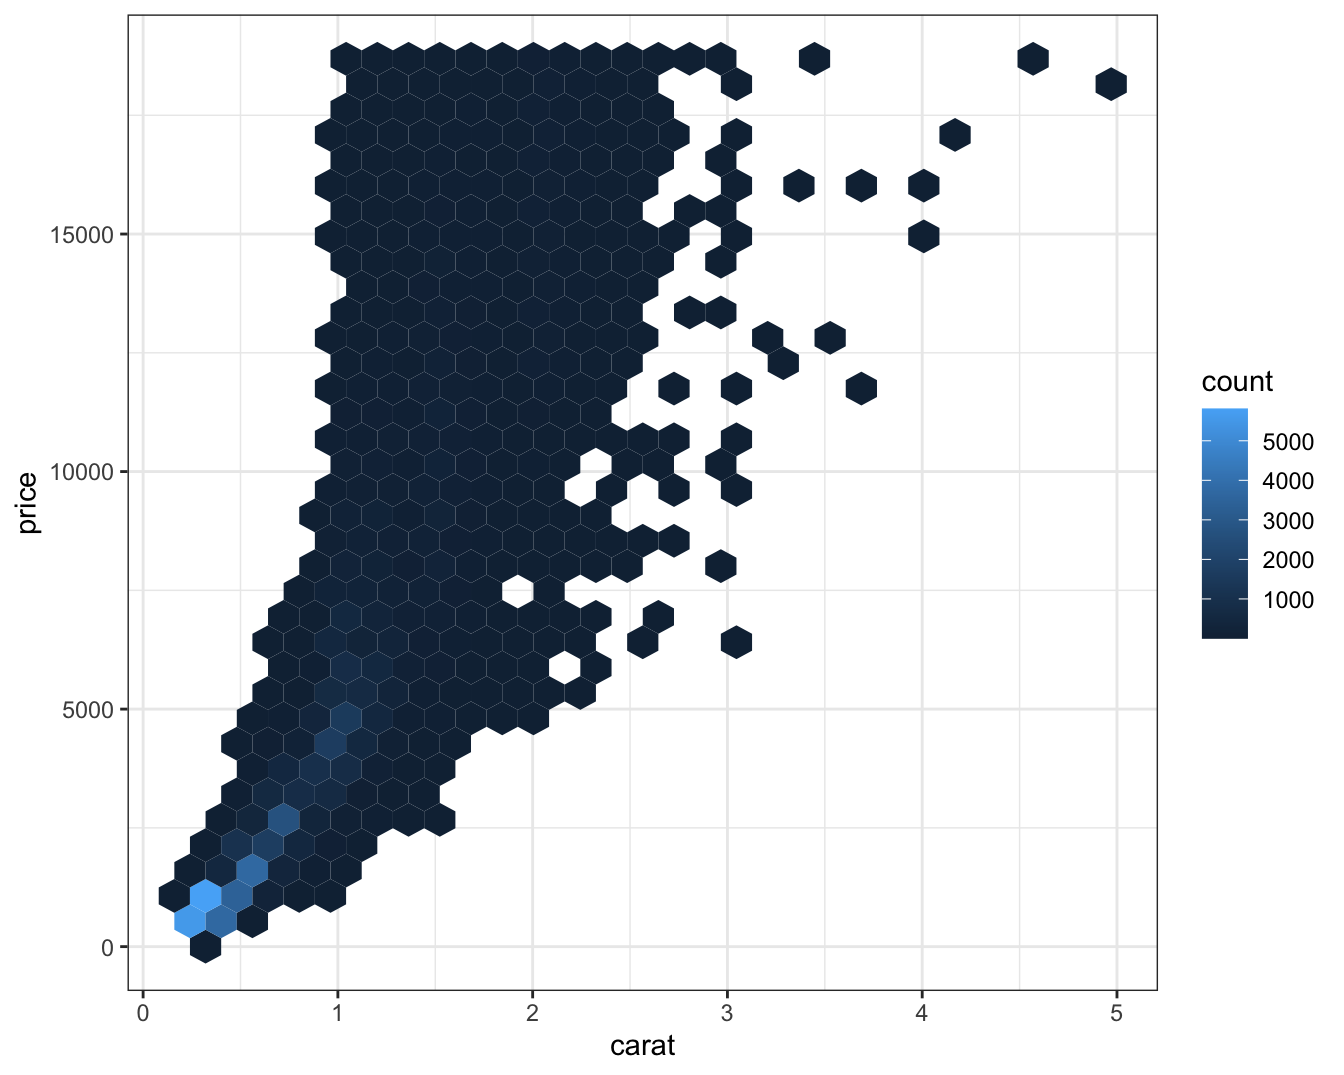 Two plots of price versus carat of diamonds. Data binned and the color of
the rectangles representing each bin based on the number of points that
fall into that bin. In the second plot, price and carat values
are logged and the axis labels shows the logged values.